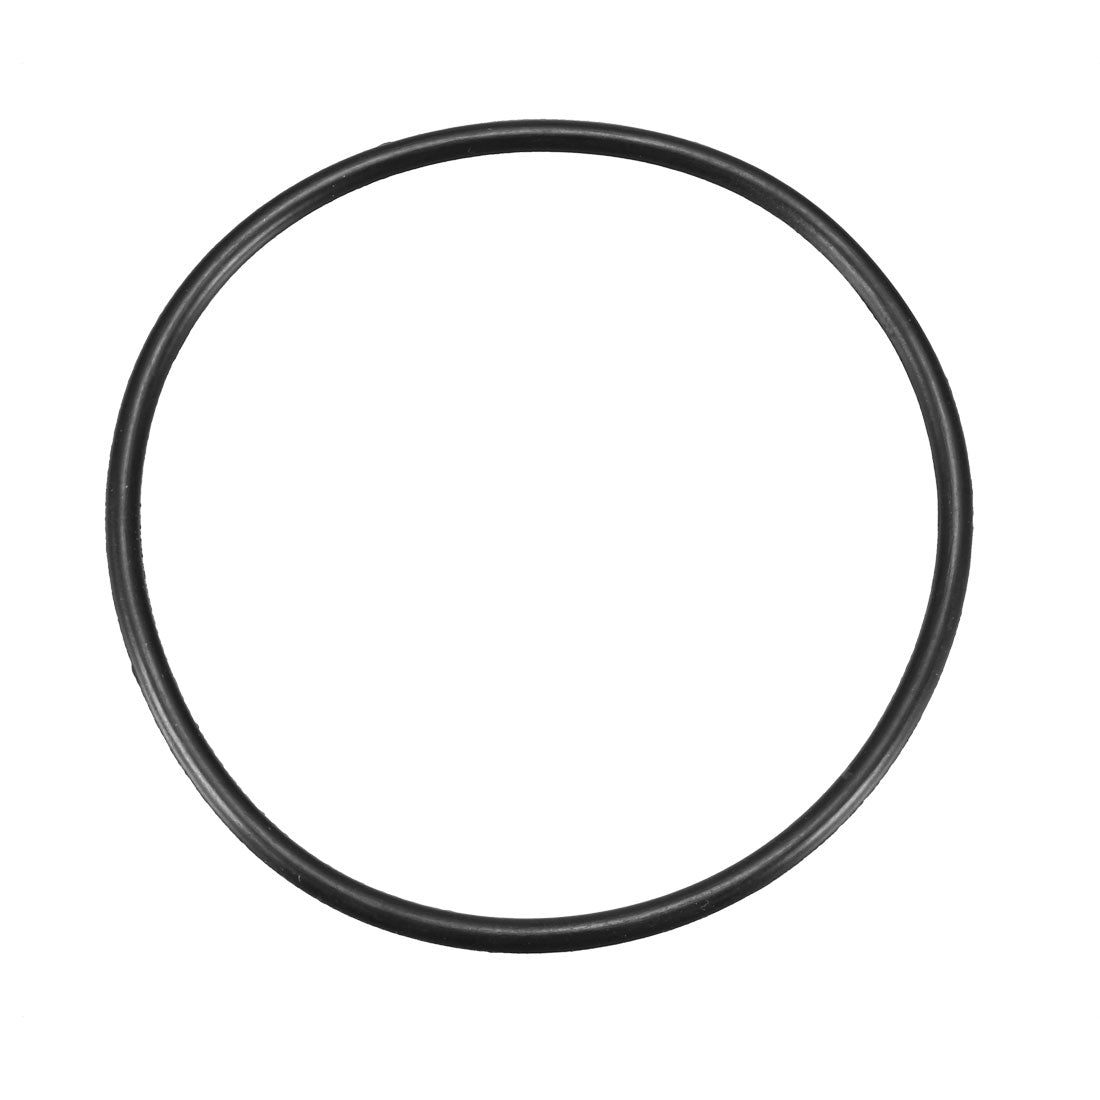 uxcell Uxcell 20 Pcs Black Rubber 80mm x 74mm Oil Seal O Rings Gaskets Washers